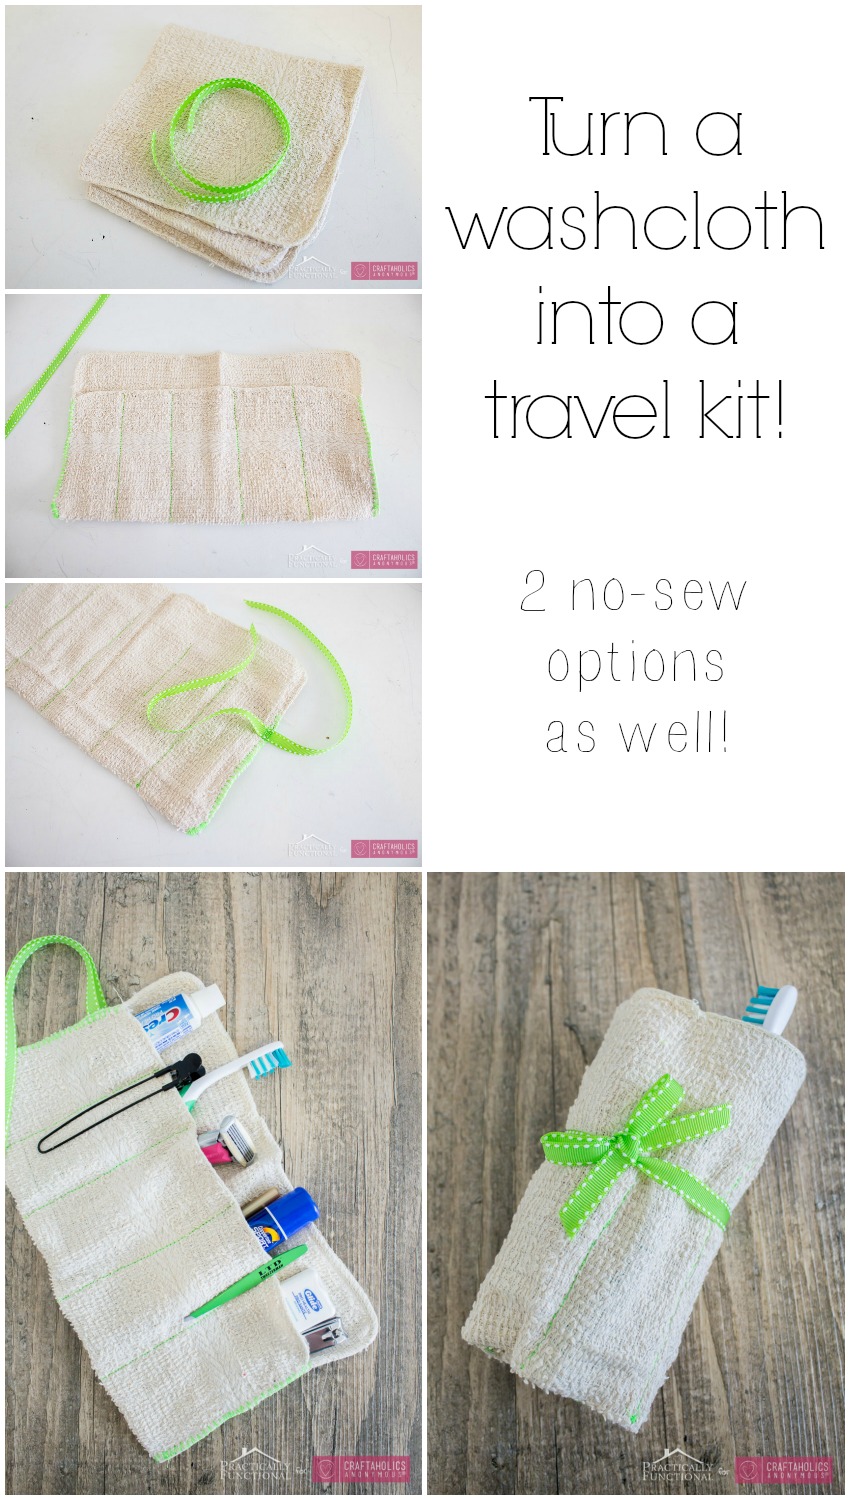 Turn a washcloth into a travel kit! A simple sewing project at Craftaholics Anonymous®